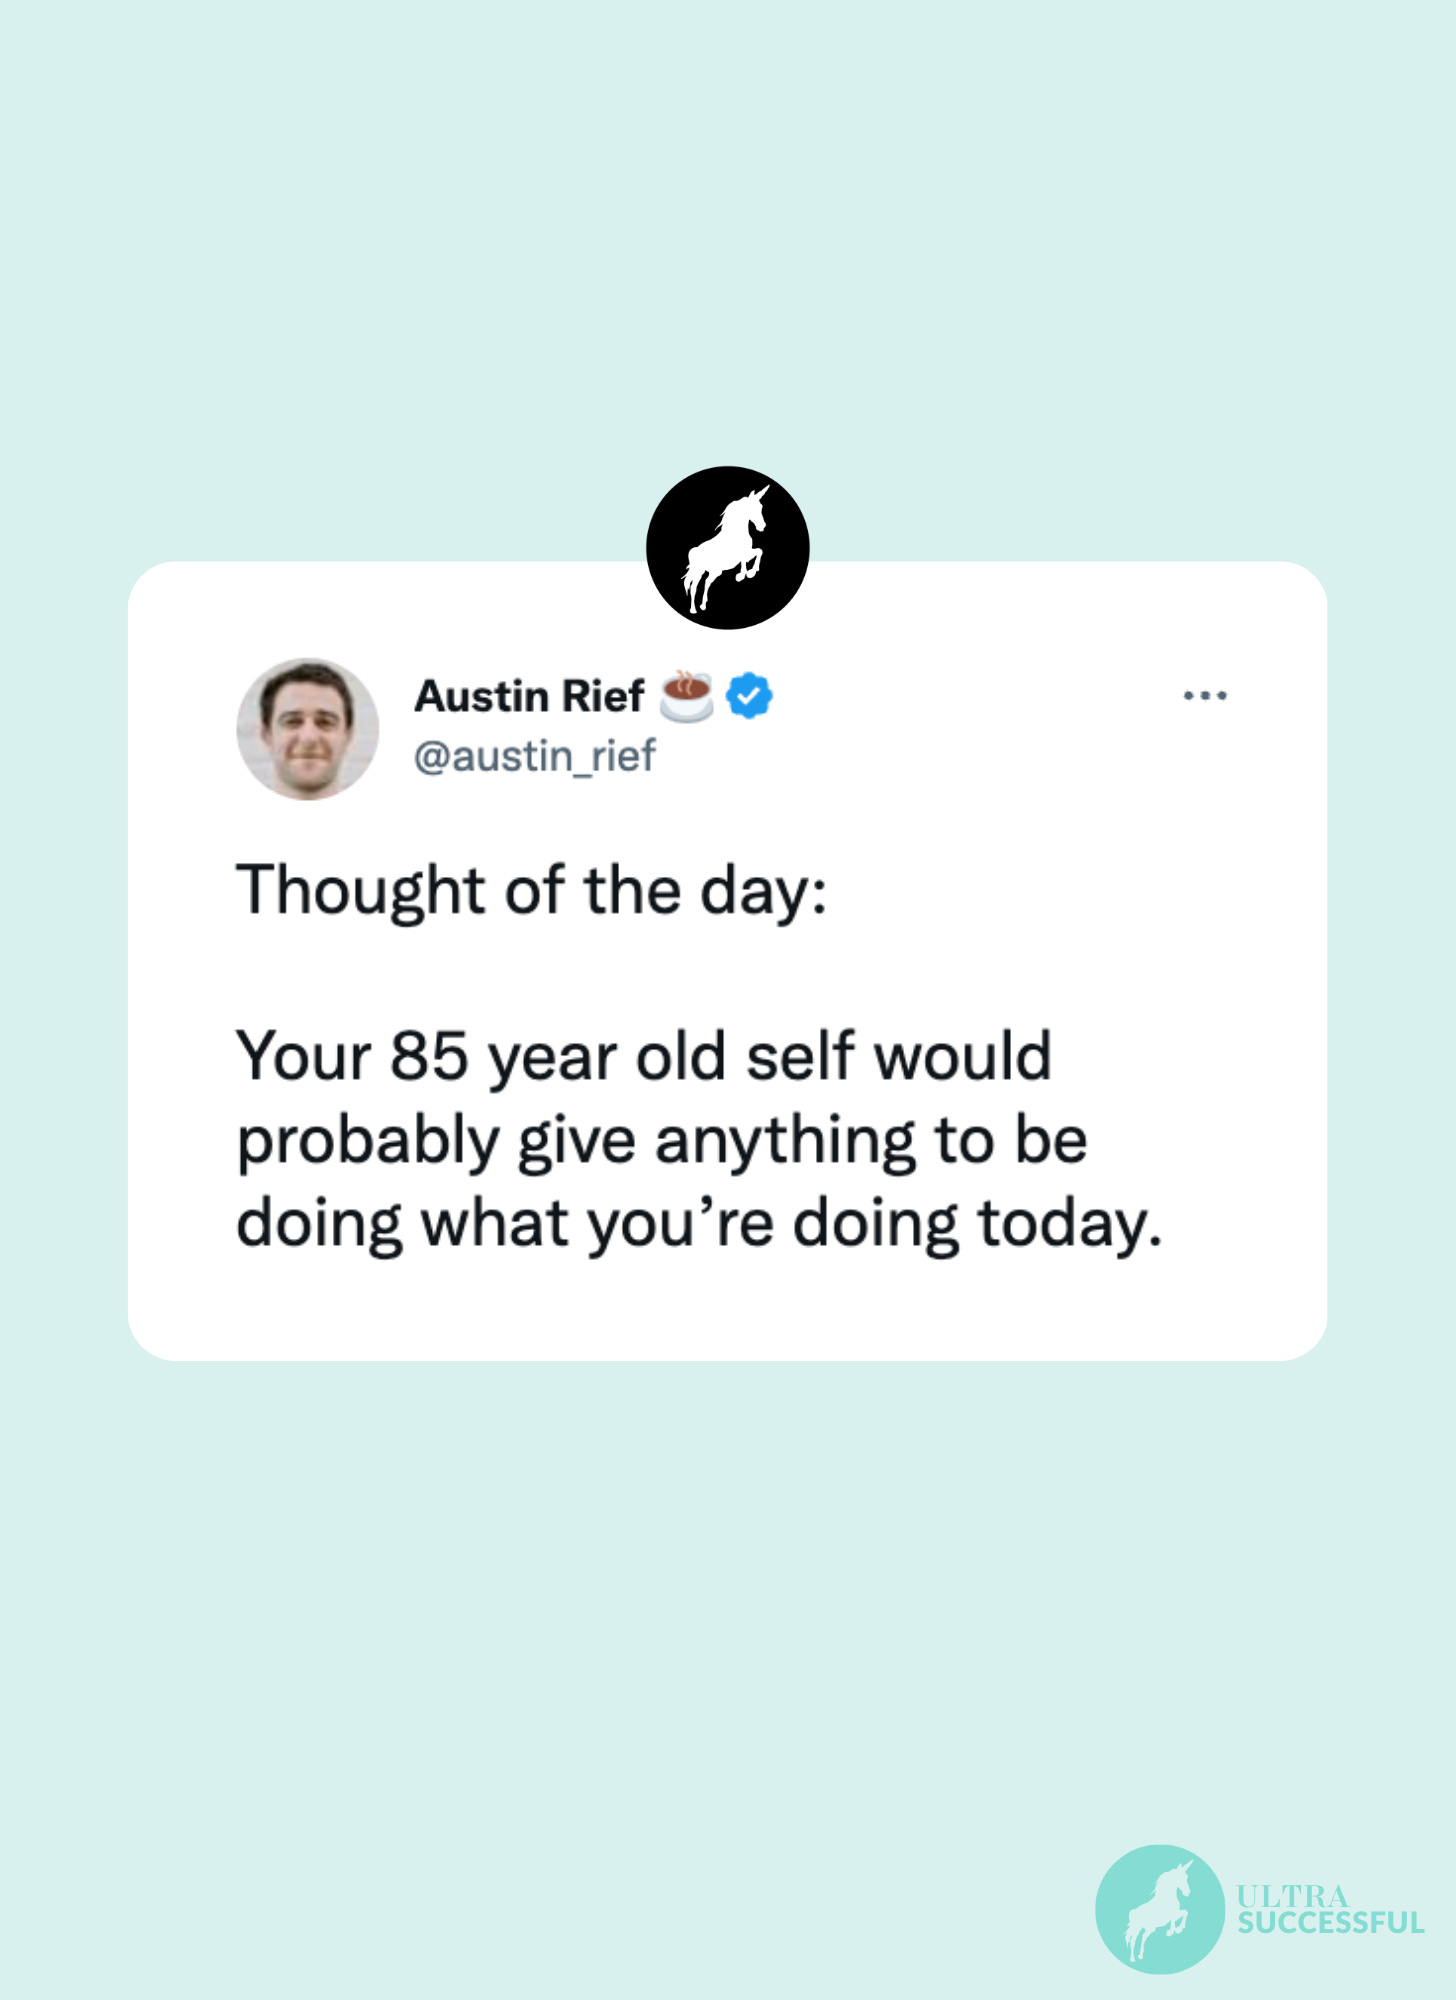 @austin_rief: Thought of the day:  Your 85 year old self would probably give anything to be doing what you’re doing today.